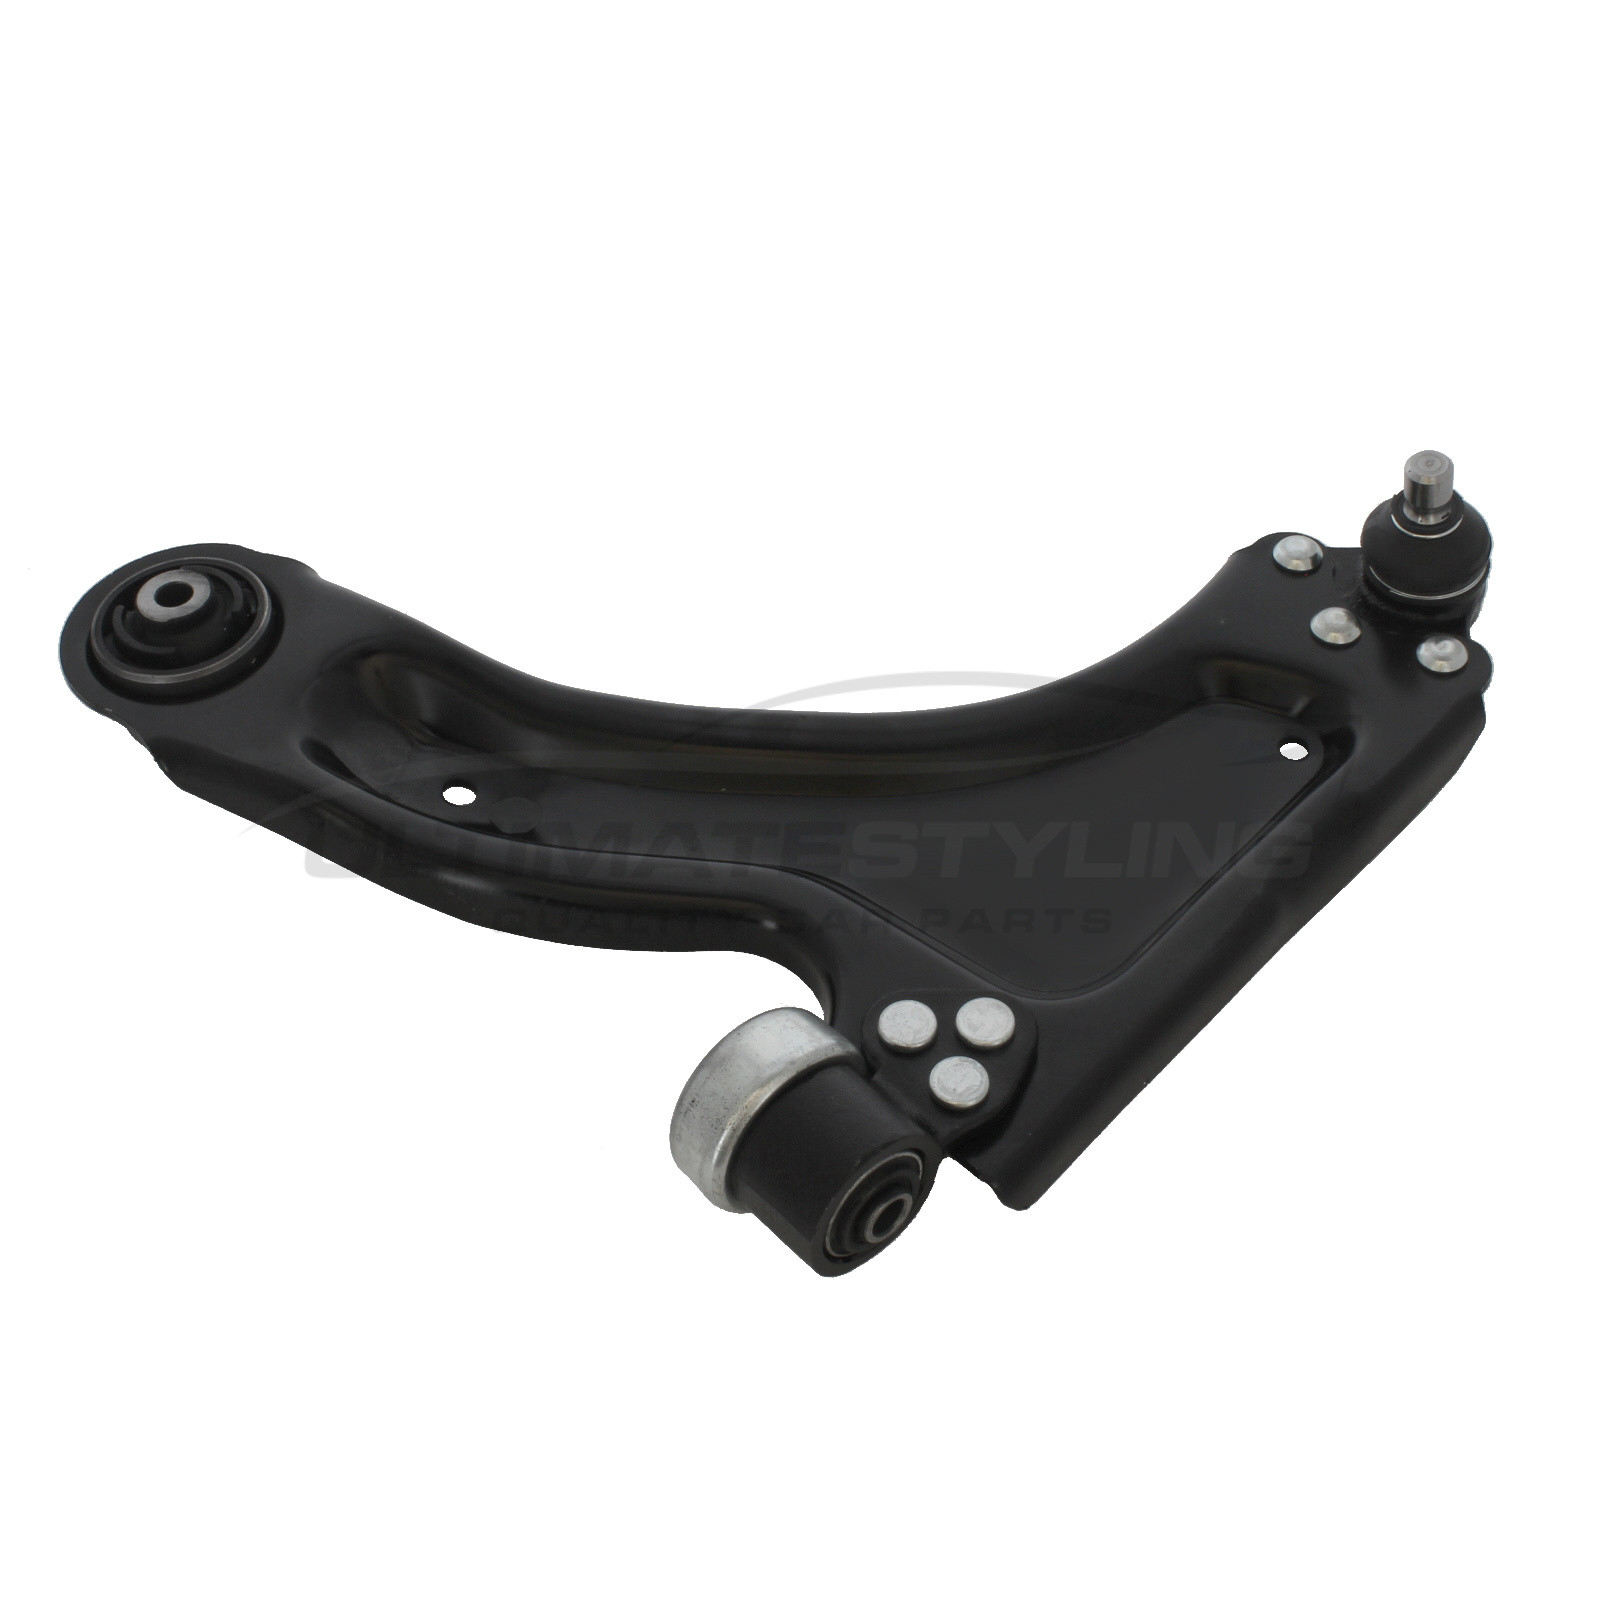 Vauxhall Combo 2001-2012, Vauxhall Corsa 2000-2005, Vauxhall Tigra 2004-2010 Front Lower Suspension Arm (Steel) Including Ball Joint and Rear Bush Passenger Side (LH)